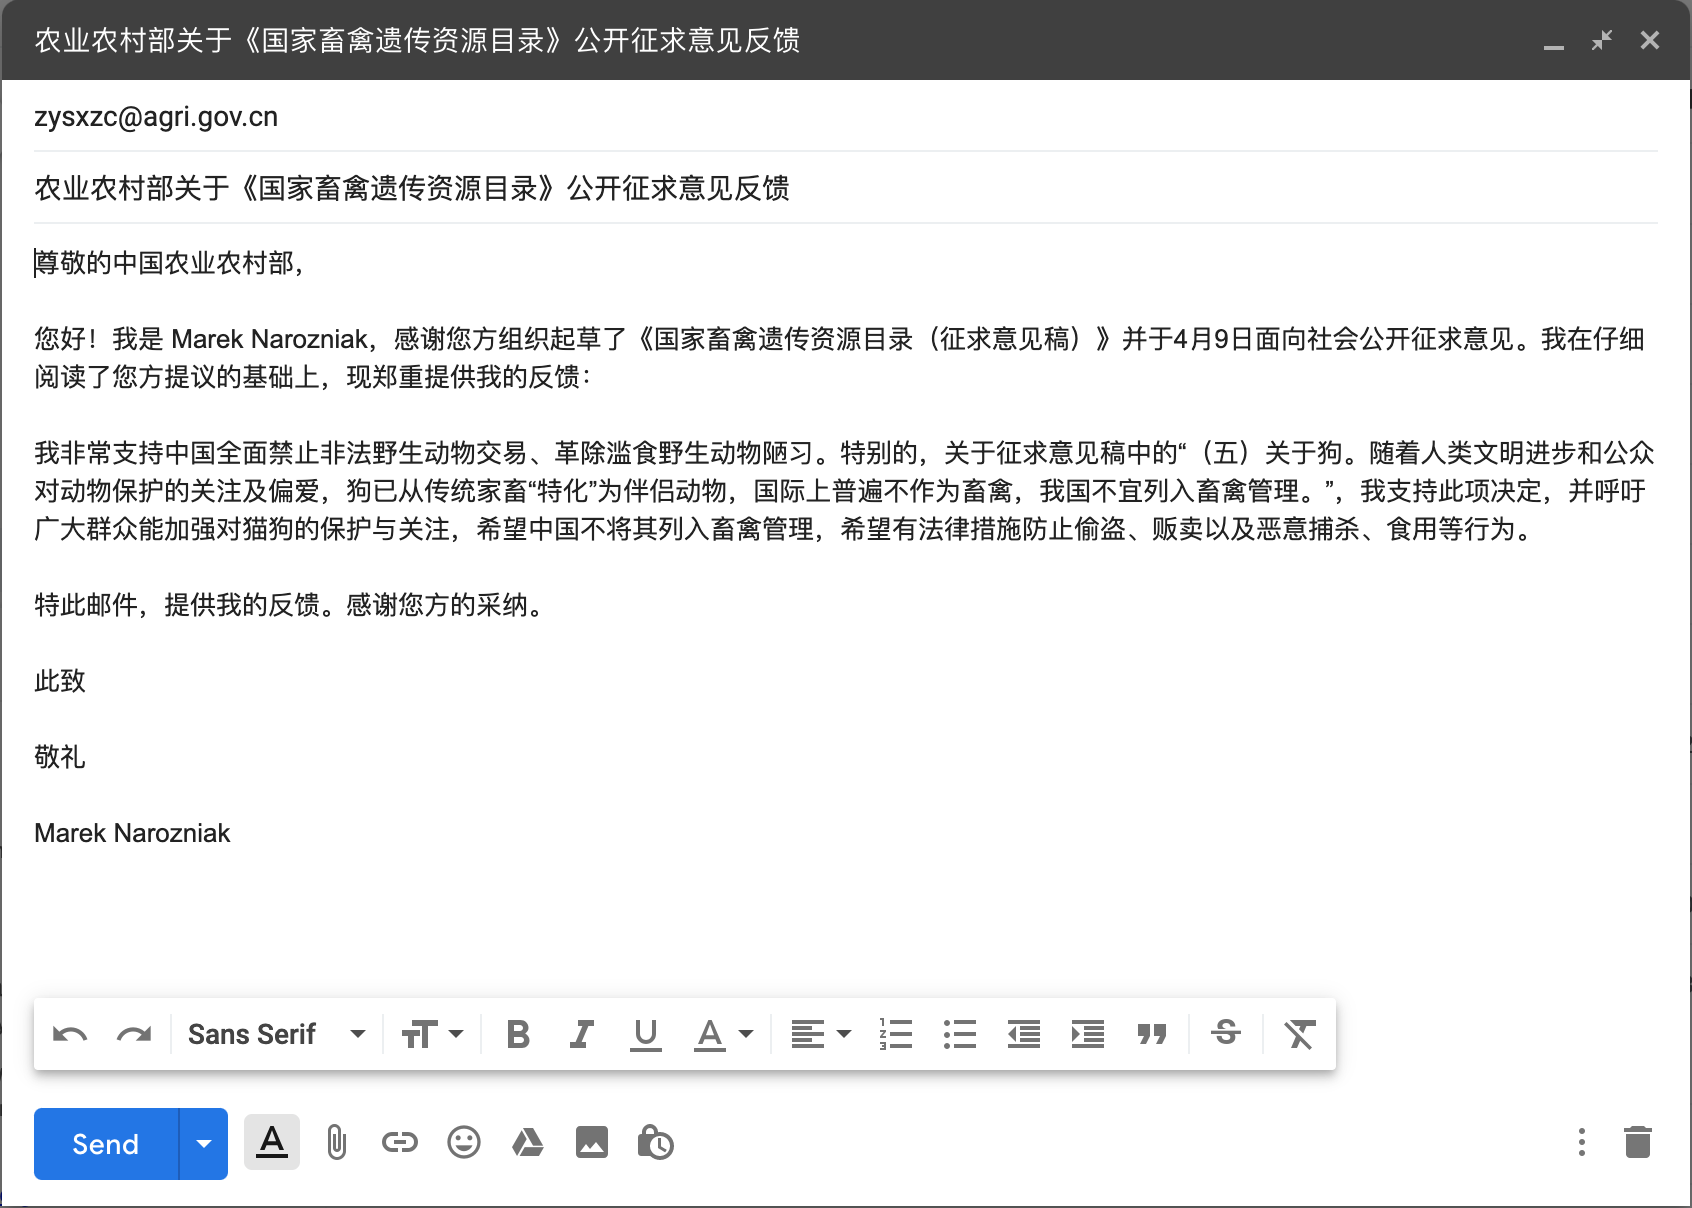 Screenshot of the e-mail draft ready to send.